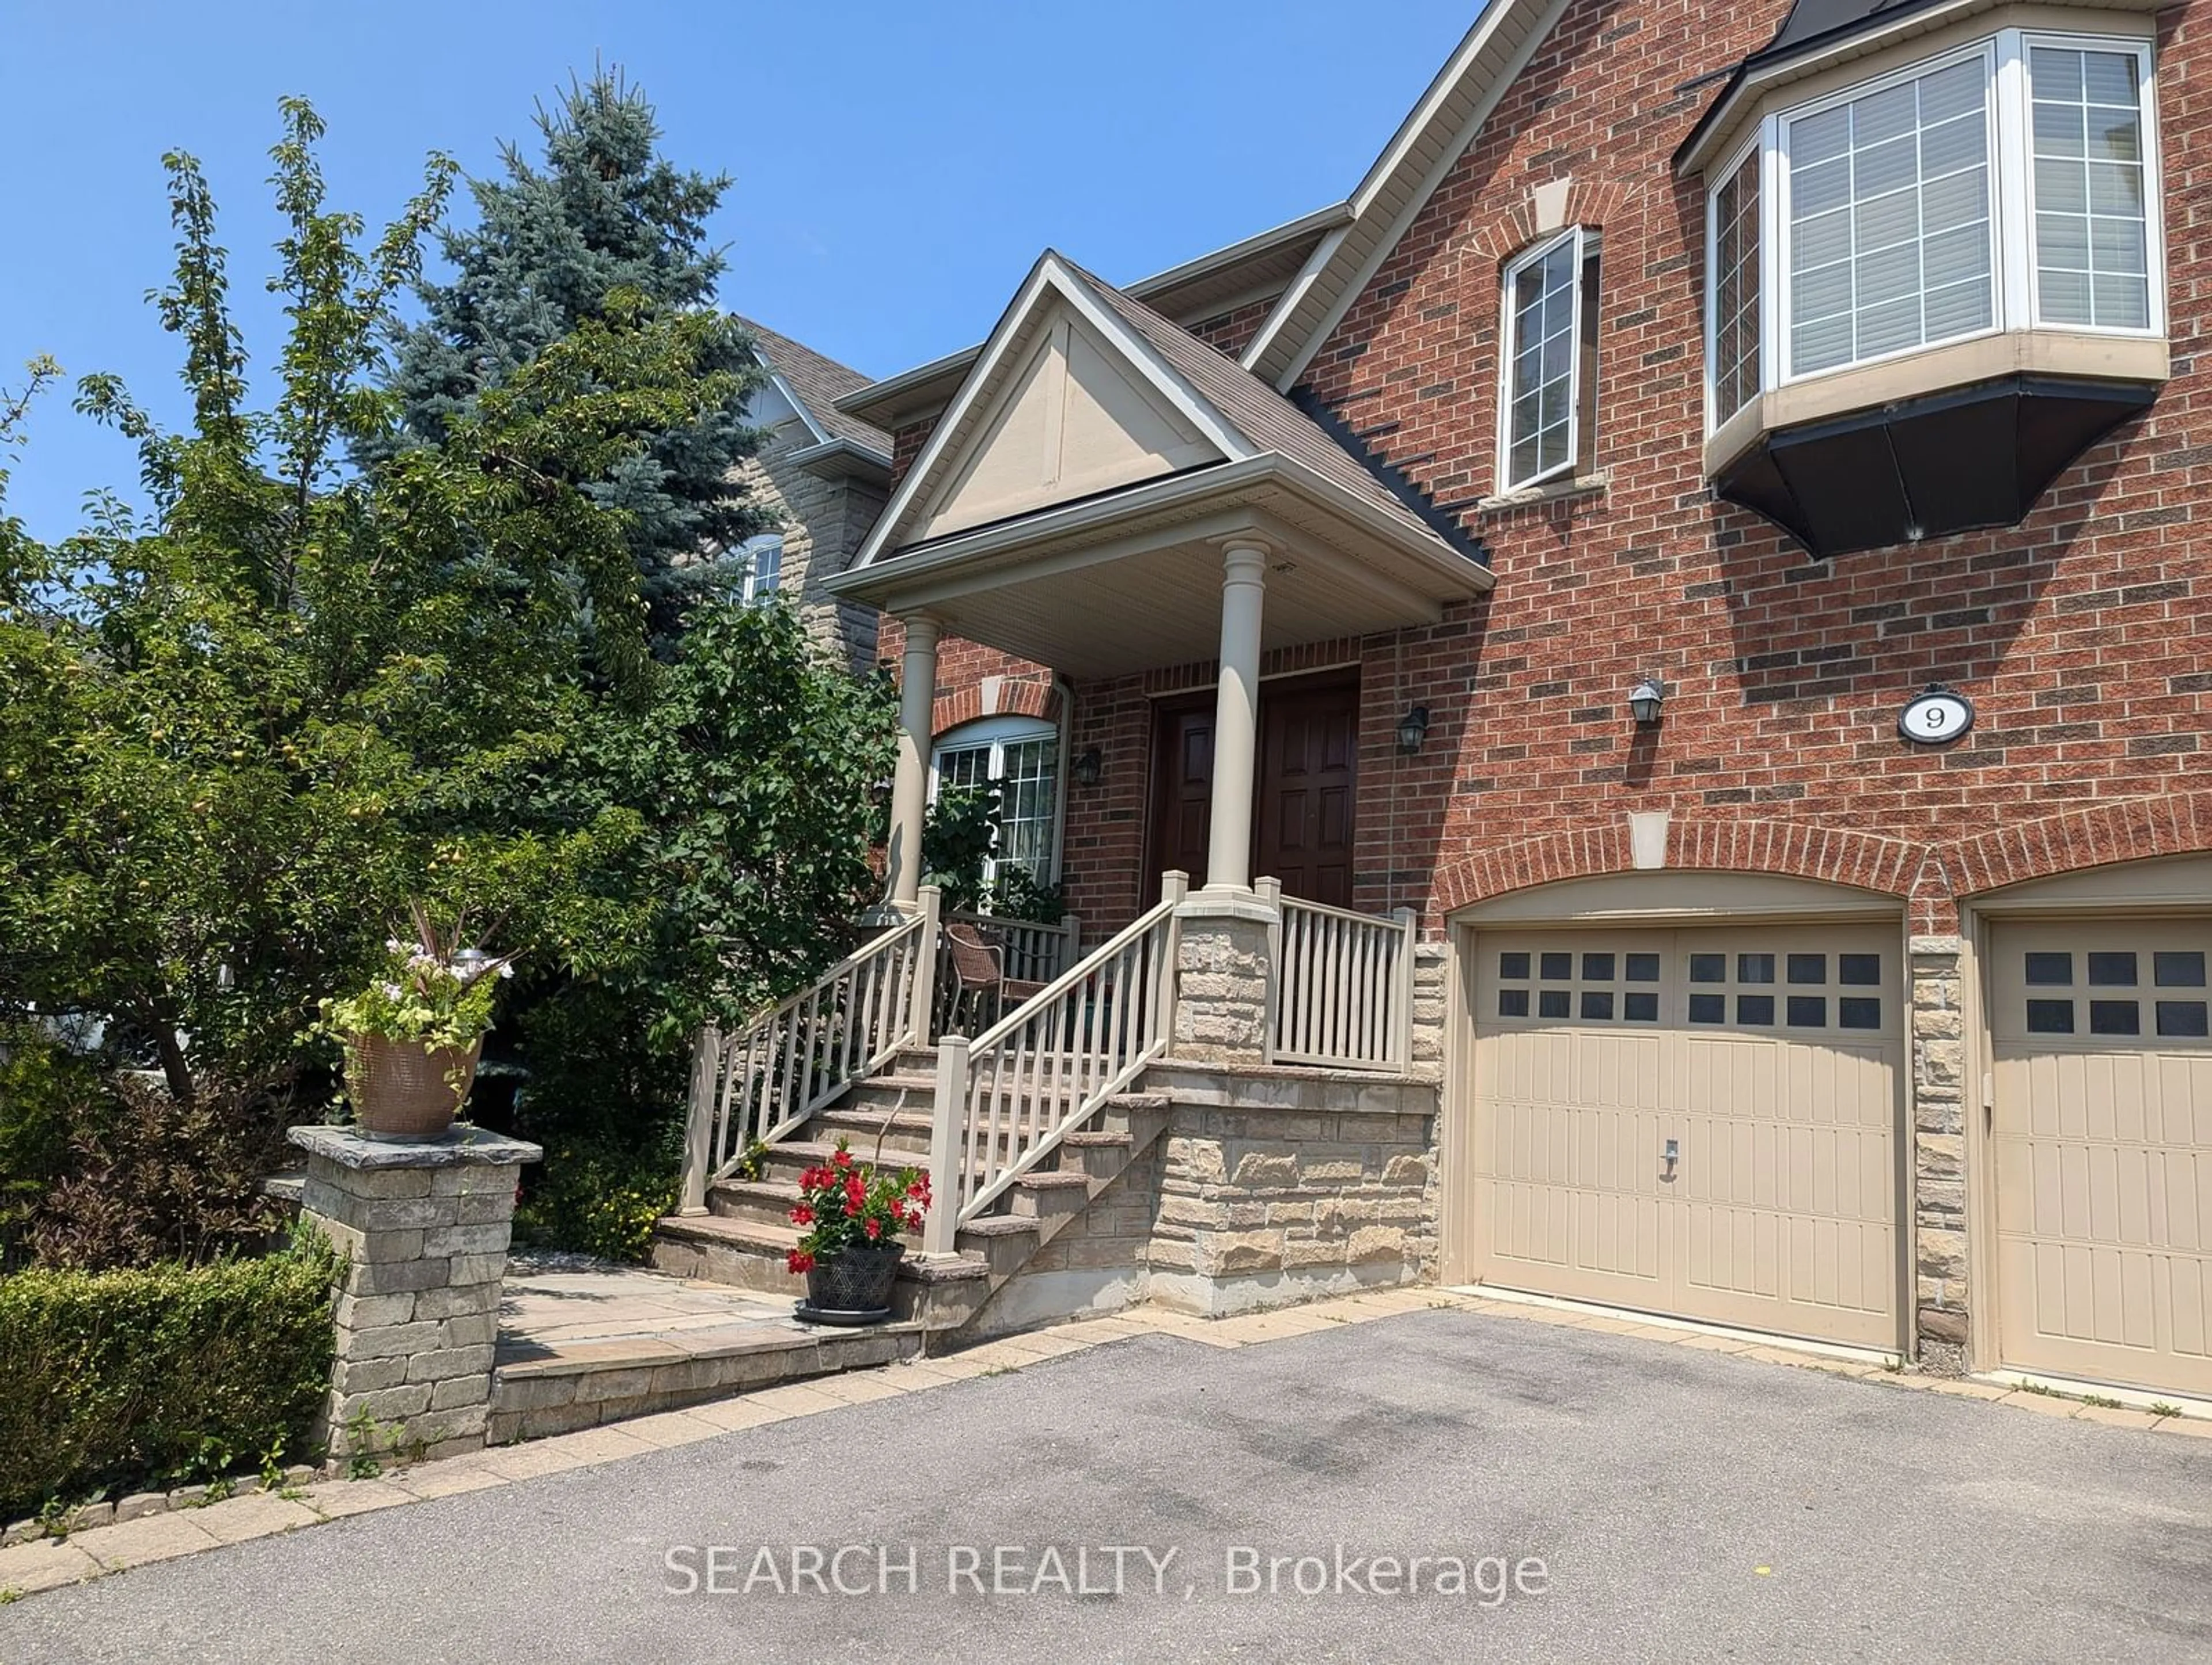 Home with brick exterior material for 9 Little Hannah Lane, Vaughan Ontario L6A 0E3